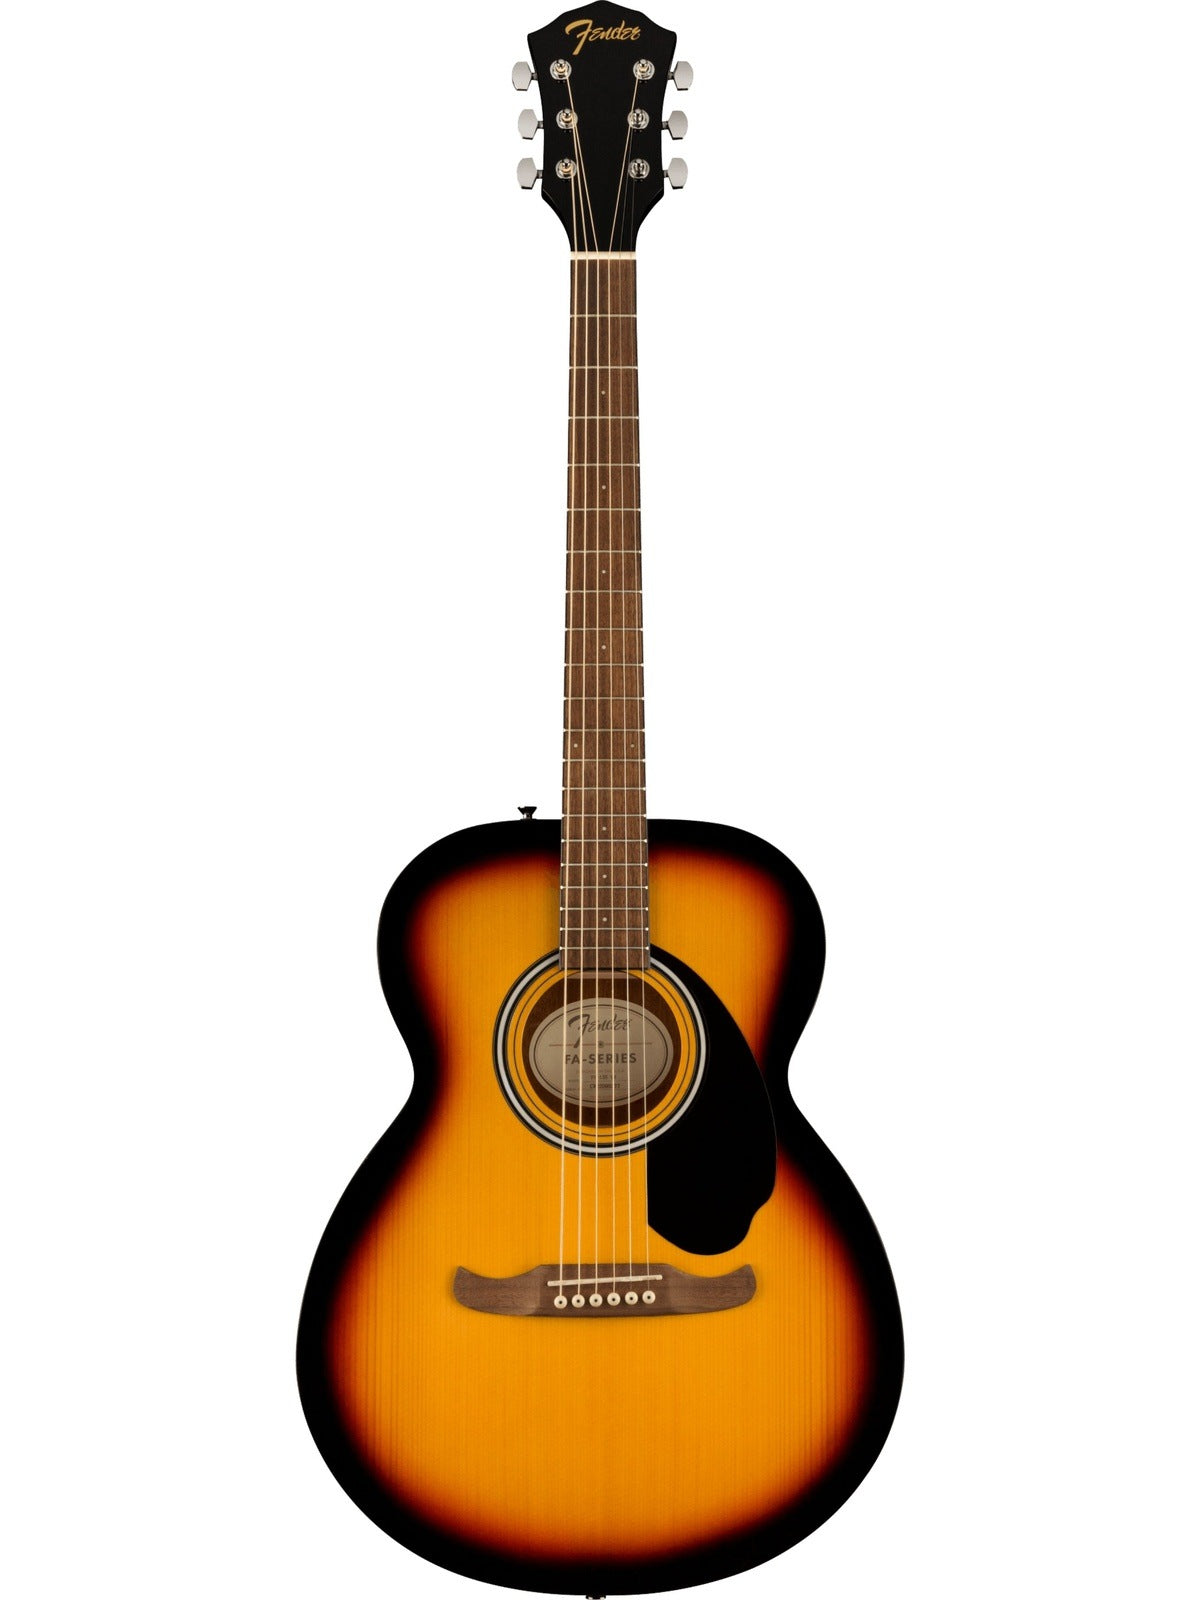 Fender Limited Edition FA-135 Concert